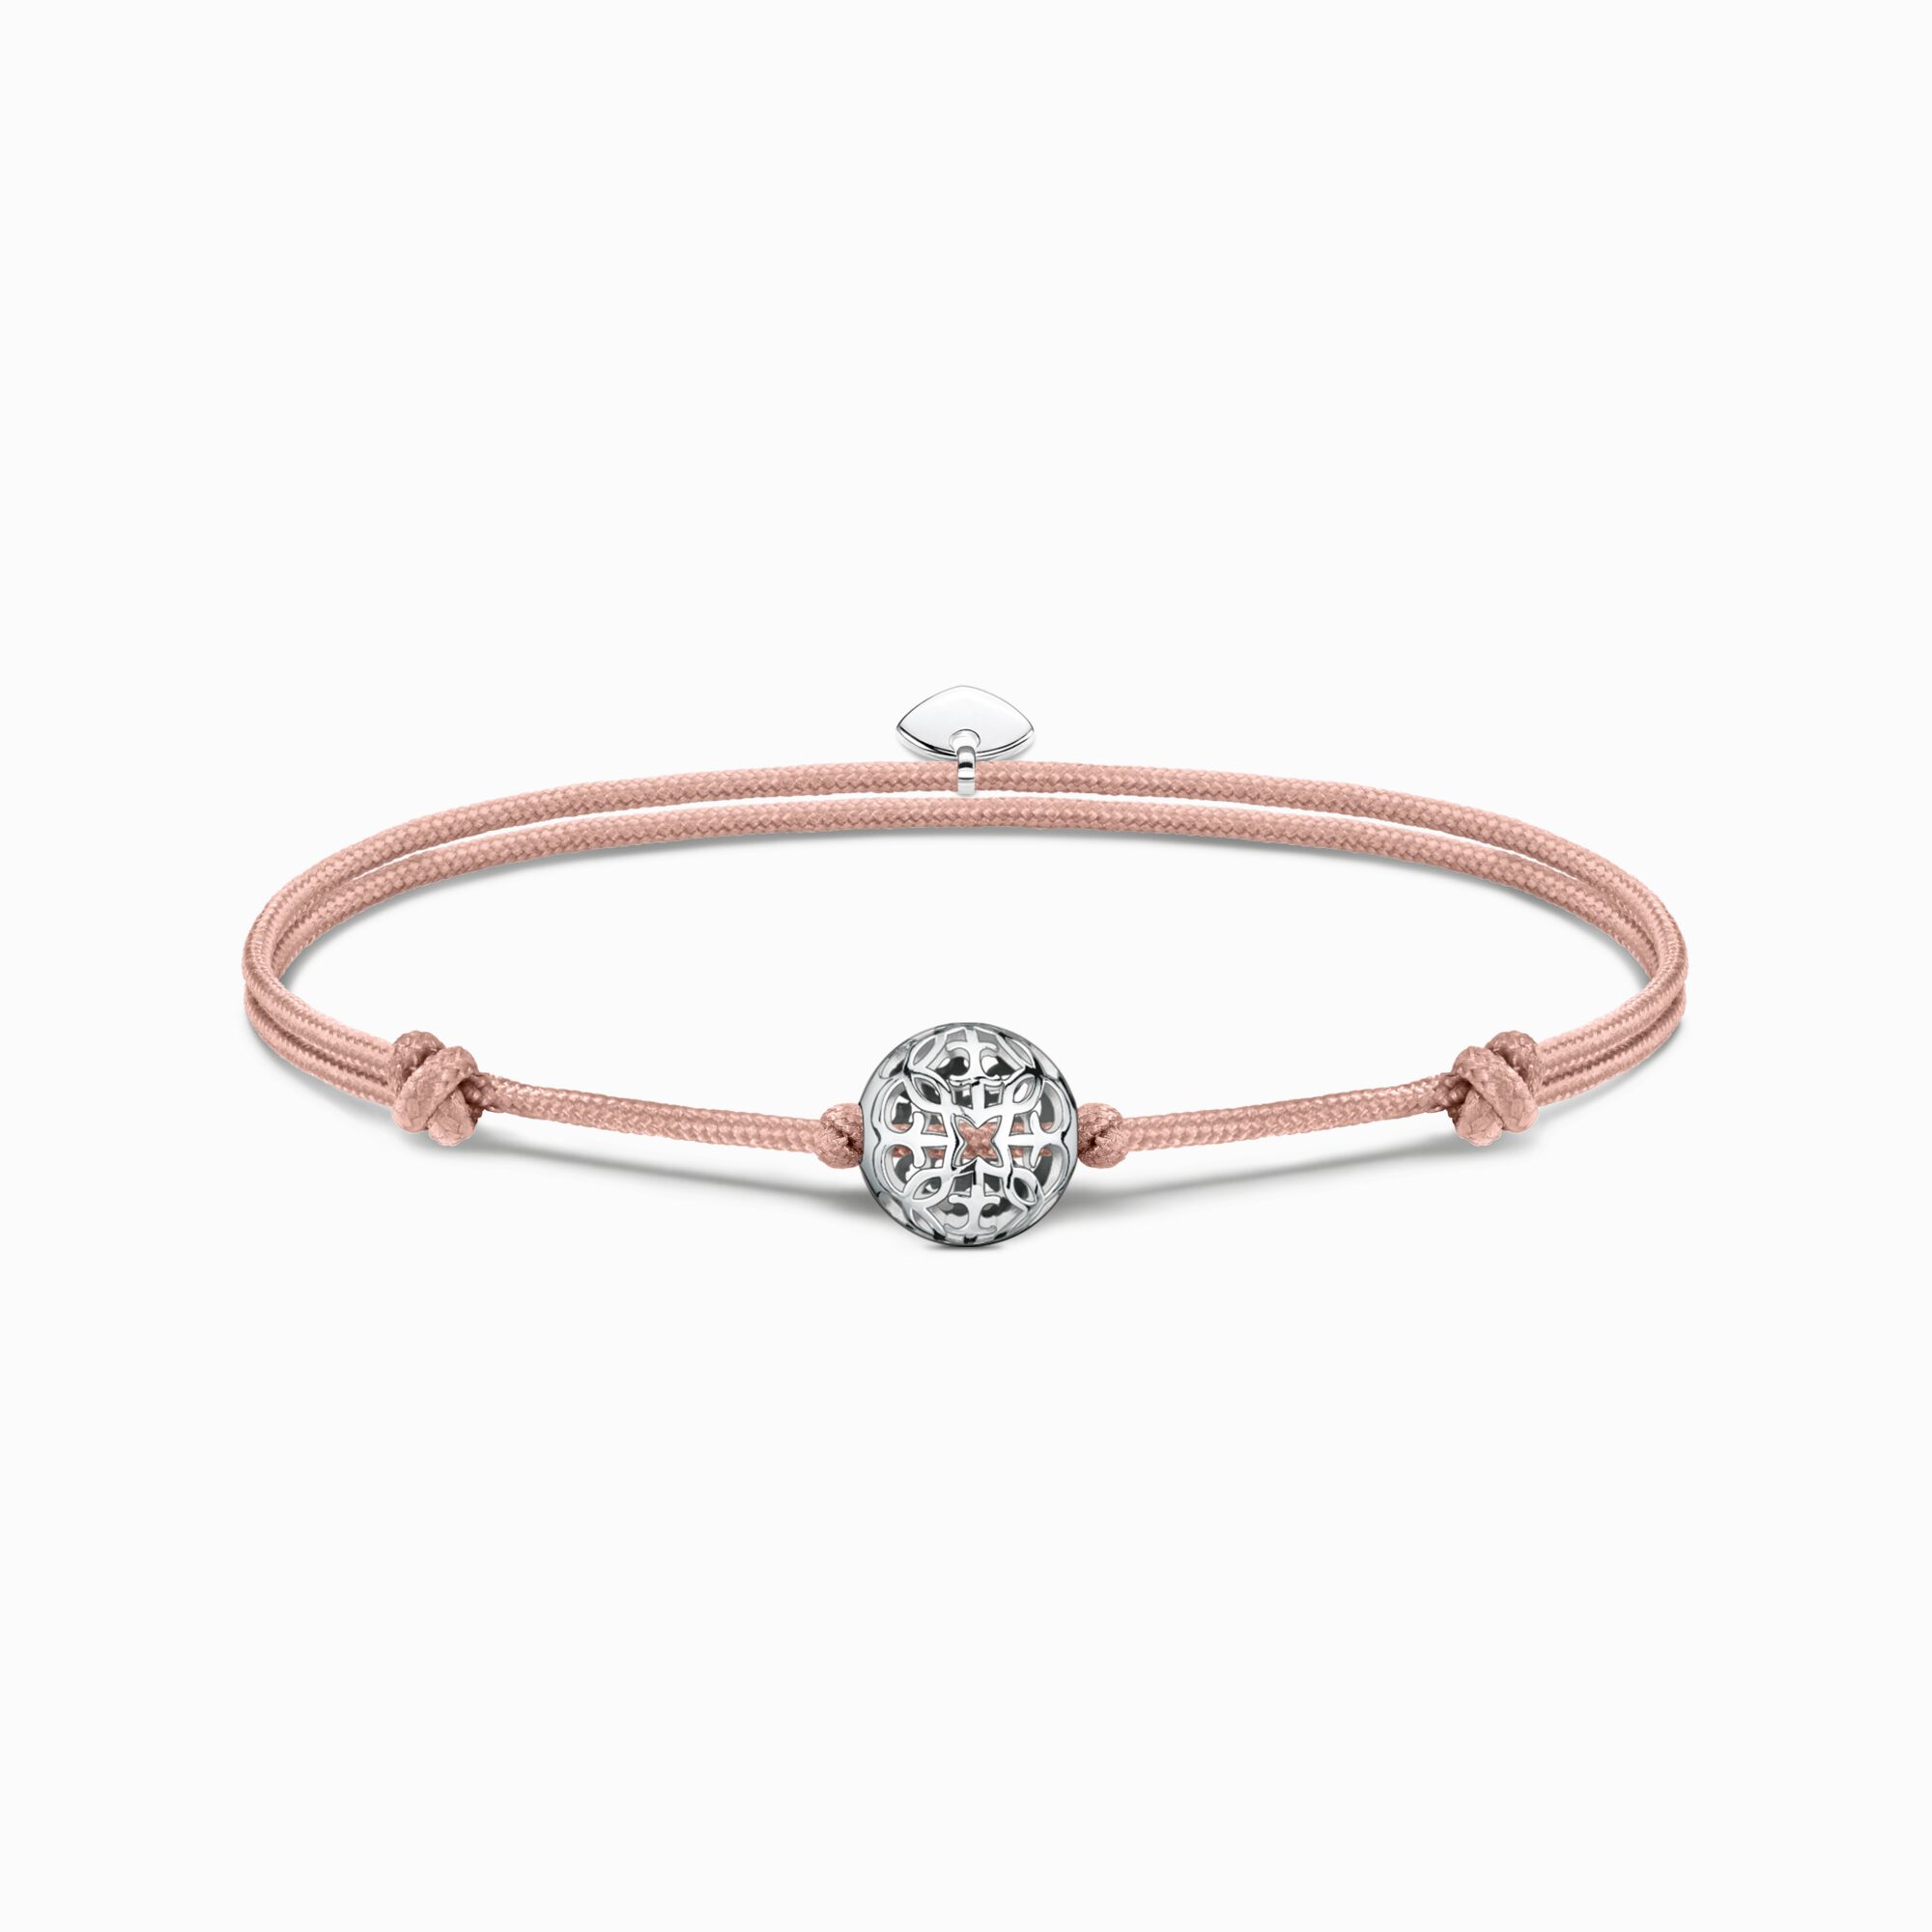 Bracelet Karma Secret with Bead silver from the Karma Beads collection in the THOMAS SABO online store